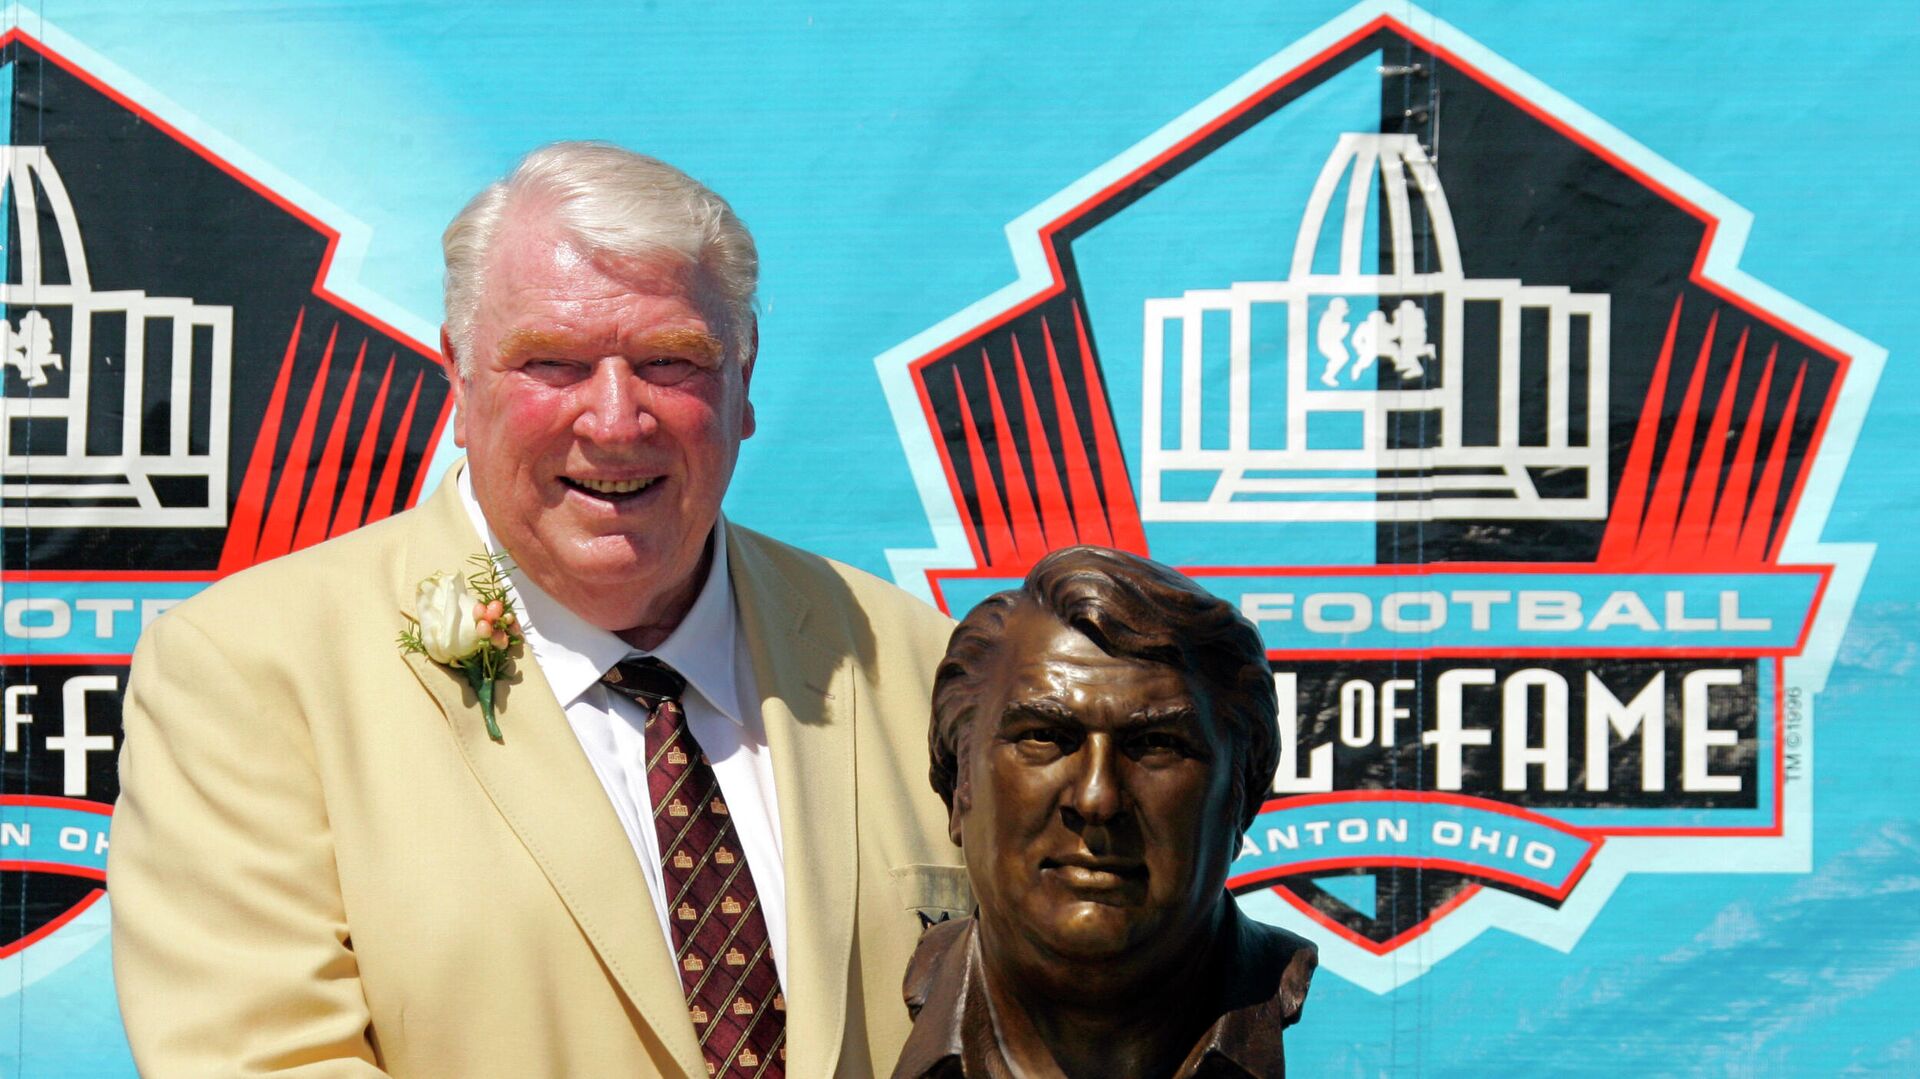 Broadcaster and former Oakland Raiders coach John Madden poses with his bust after enshrinement into the Pro Football Hall of Fame Saturday, Aug. 5, 2006, in Canton, Ohio. - Sputnik International, 1920, 29.12.2021